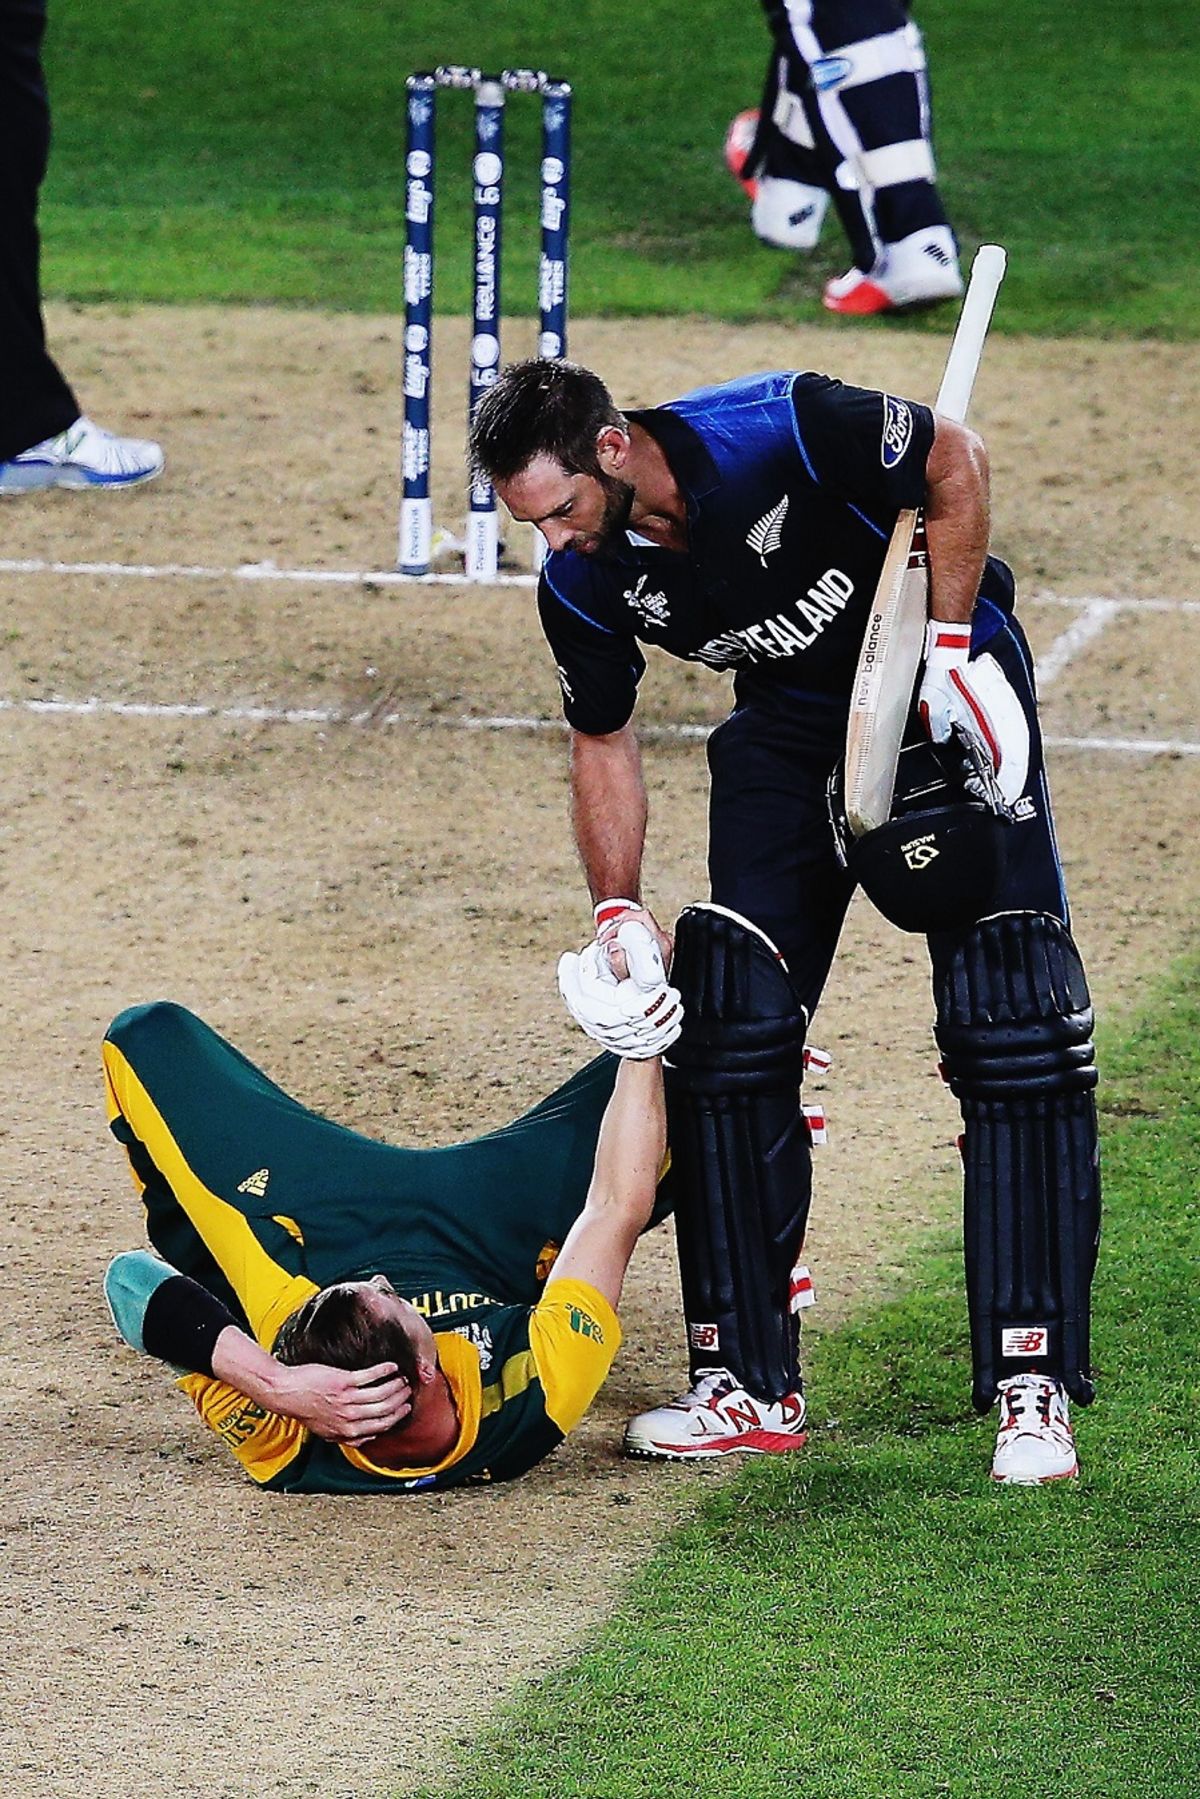 Grant Elliott helps Dale Steyn up after a highly emotional finish, New Zealand v South Africa, World Cup 2015, 1st Semi-Final, Auckland, March 24, 2015